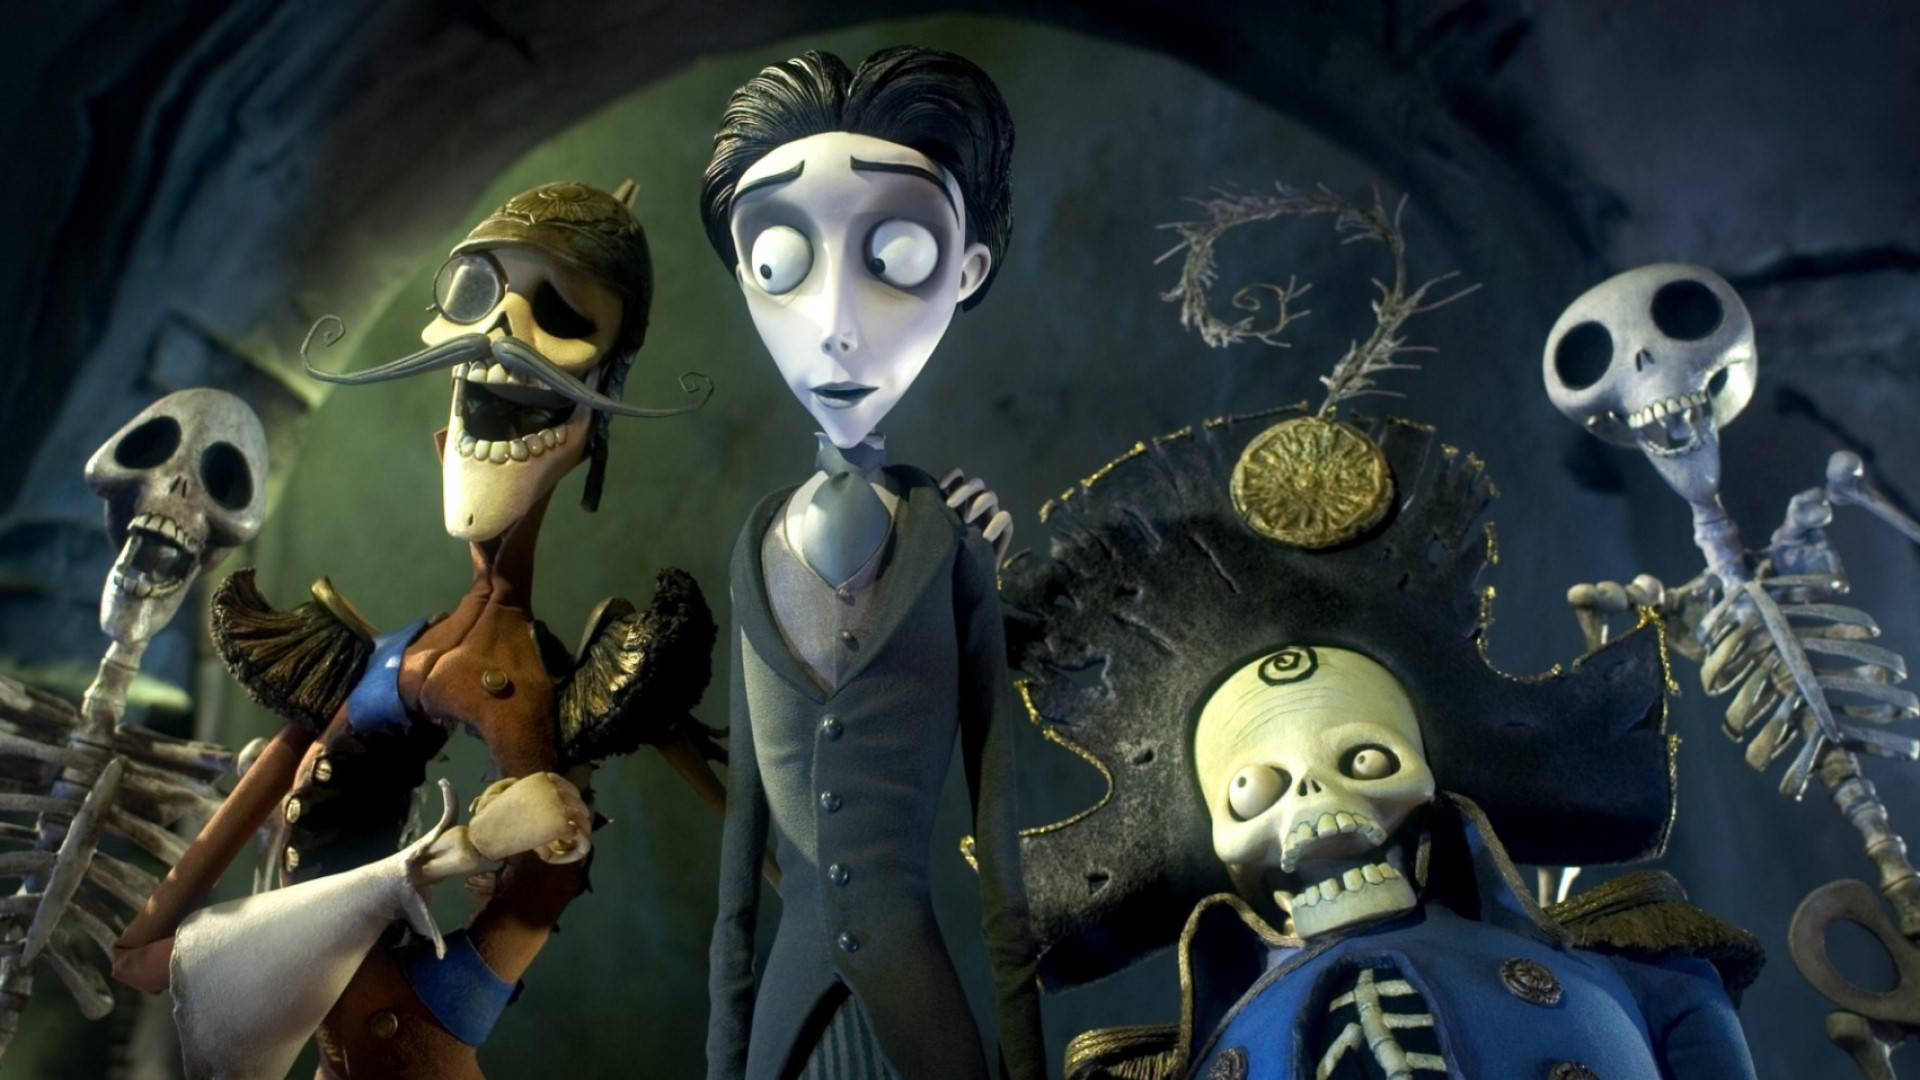 Victor From Corpse Bride Wallpaper